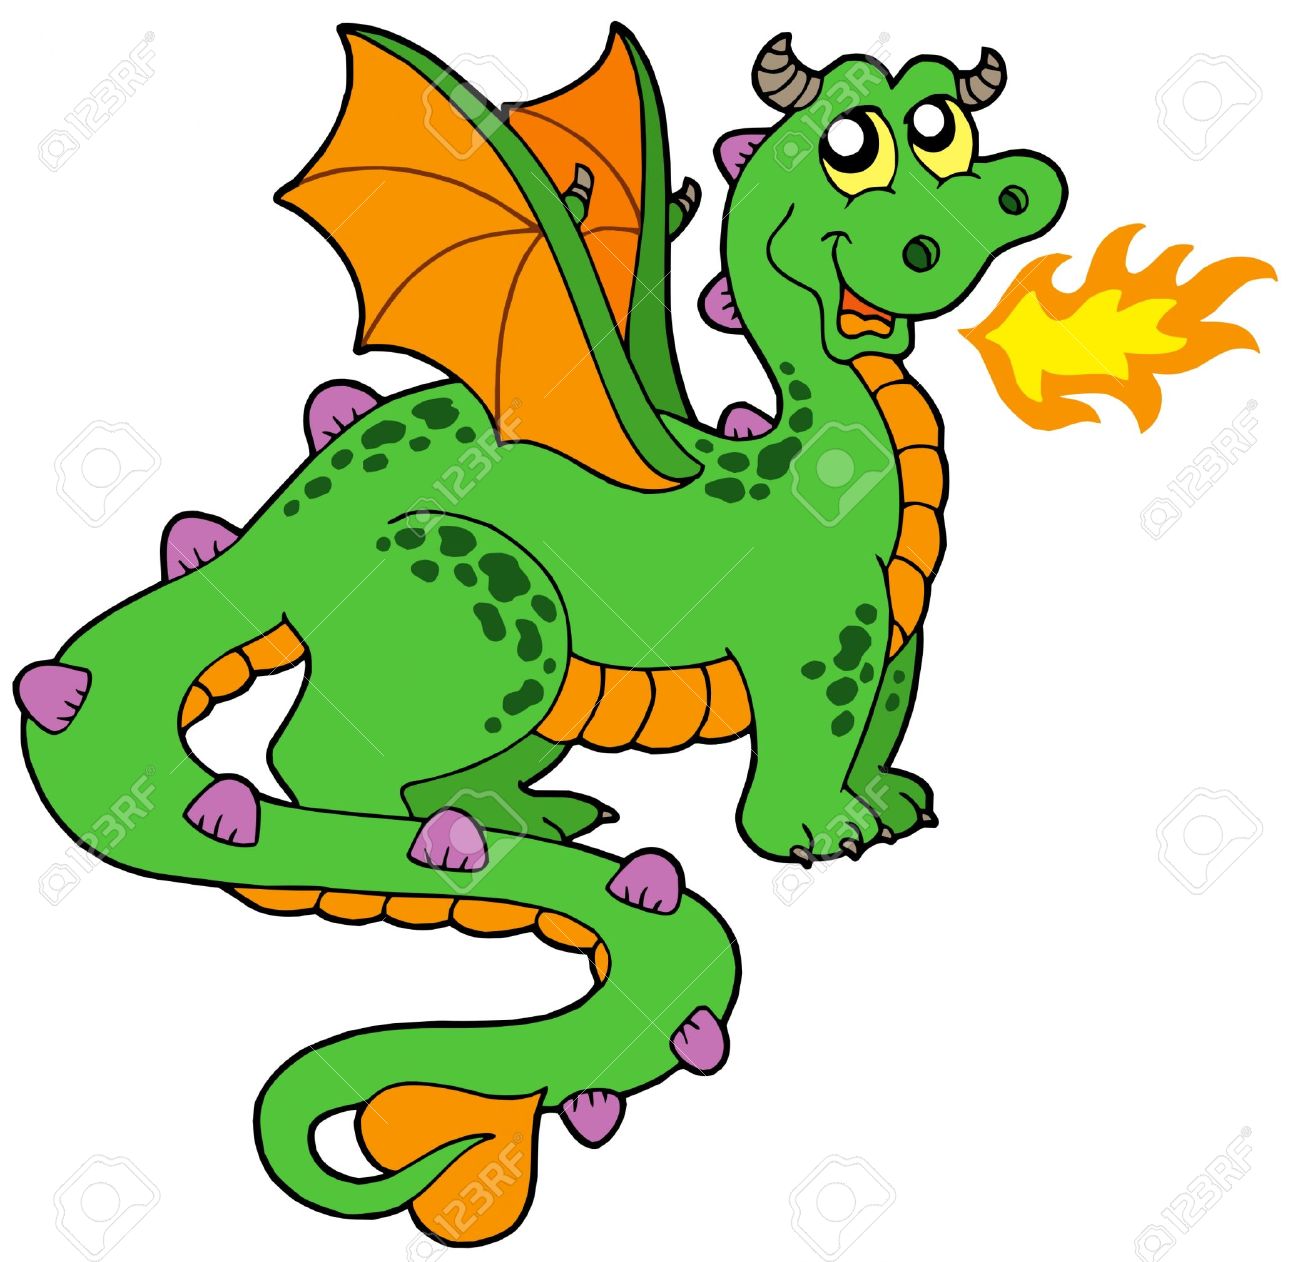 Flame tail clipart.